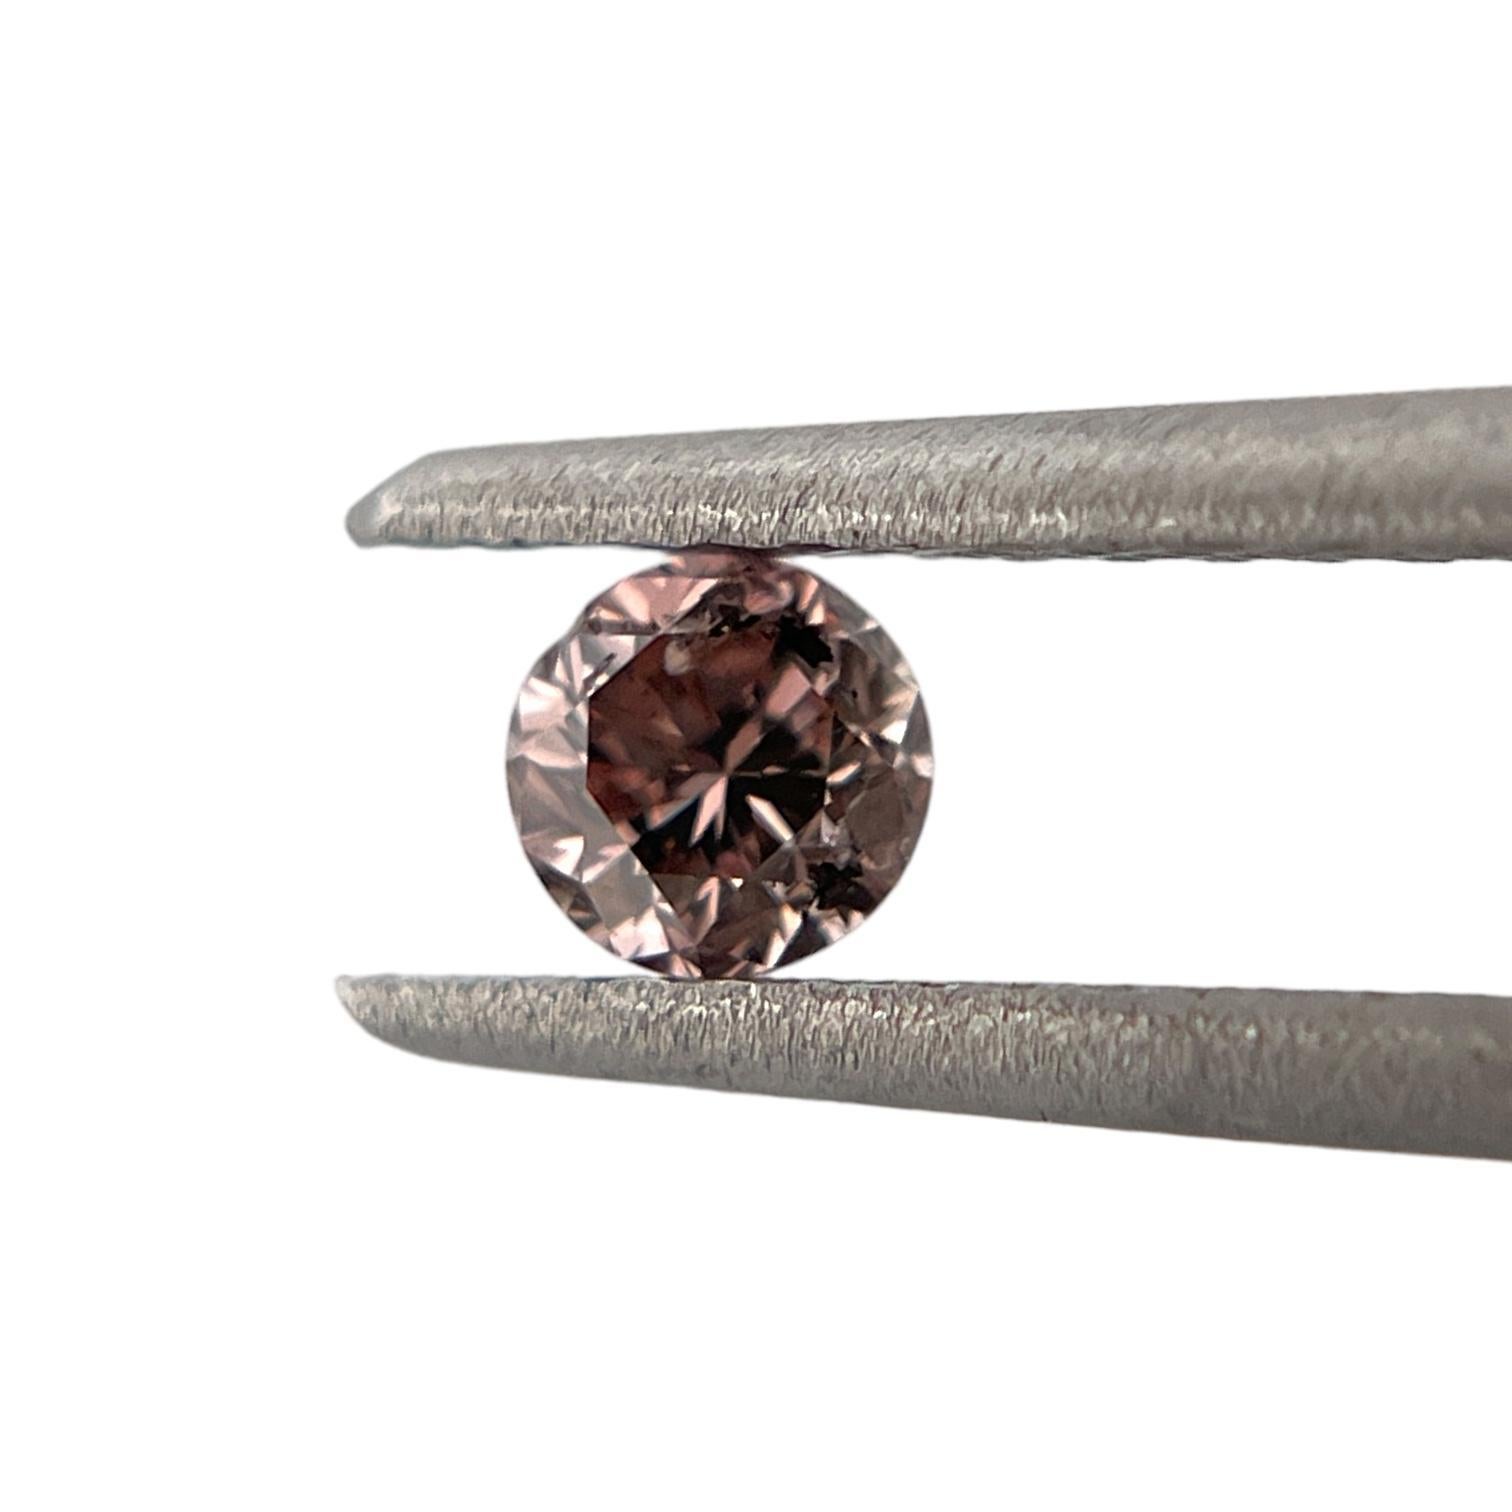 ITEM DESCRIPTION

ID #: NYC57744
Stone Shape: Round
Diamond Weight: 0.28 Carat
Fancy Color: Brownish Pink
Cut:	Brilliant
Measurements: 4.32 x 4.36 x 2.48 mm
Symmetry: Excellent
Polish: Excellent
Fluorescence: None
Certifying Lab: GIA
GIA Certificate